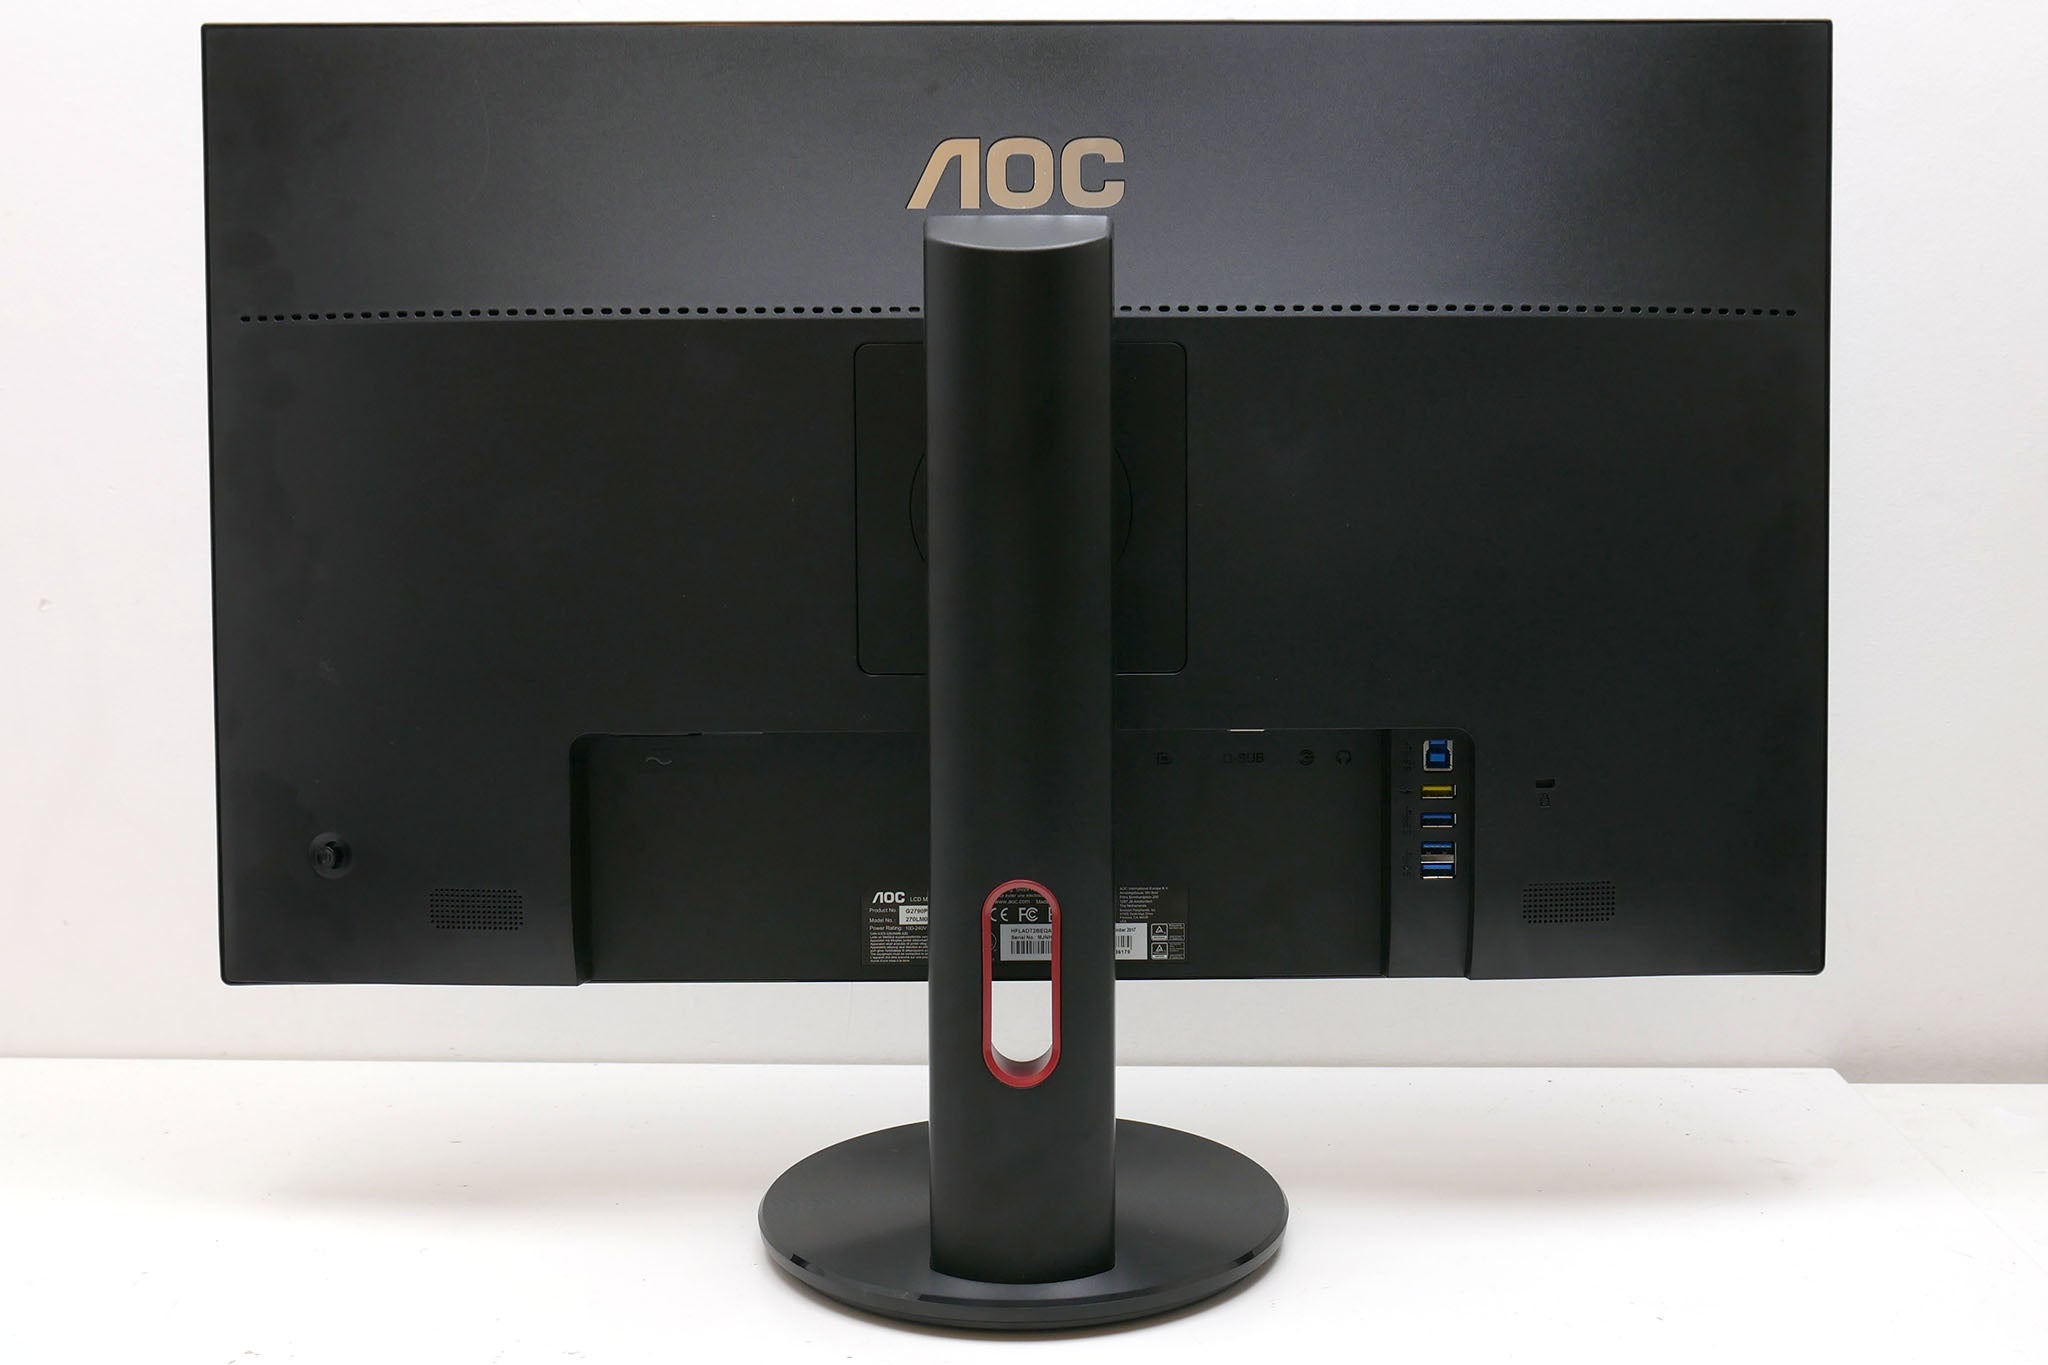 AOC G2790PX gaming monitor rear view showing ports and stand